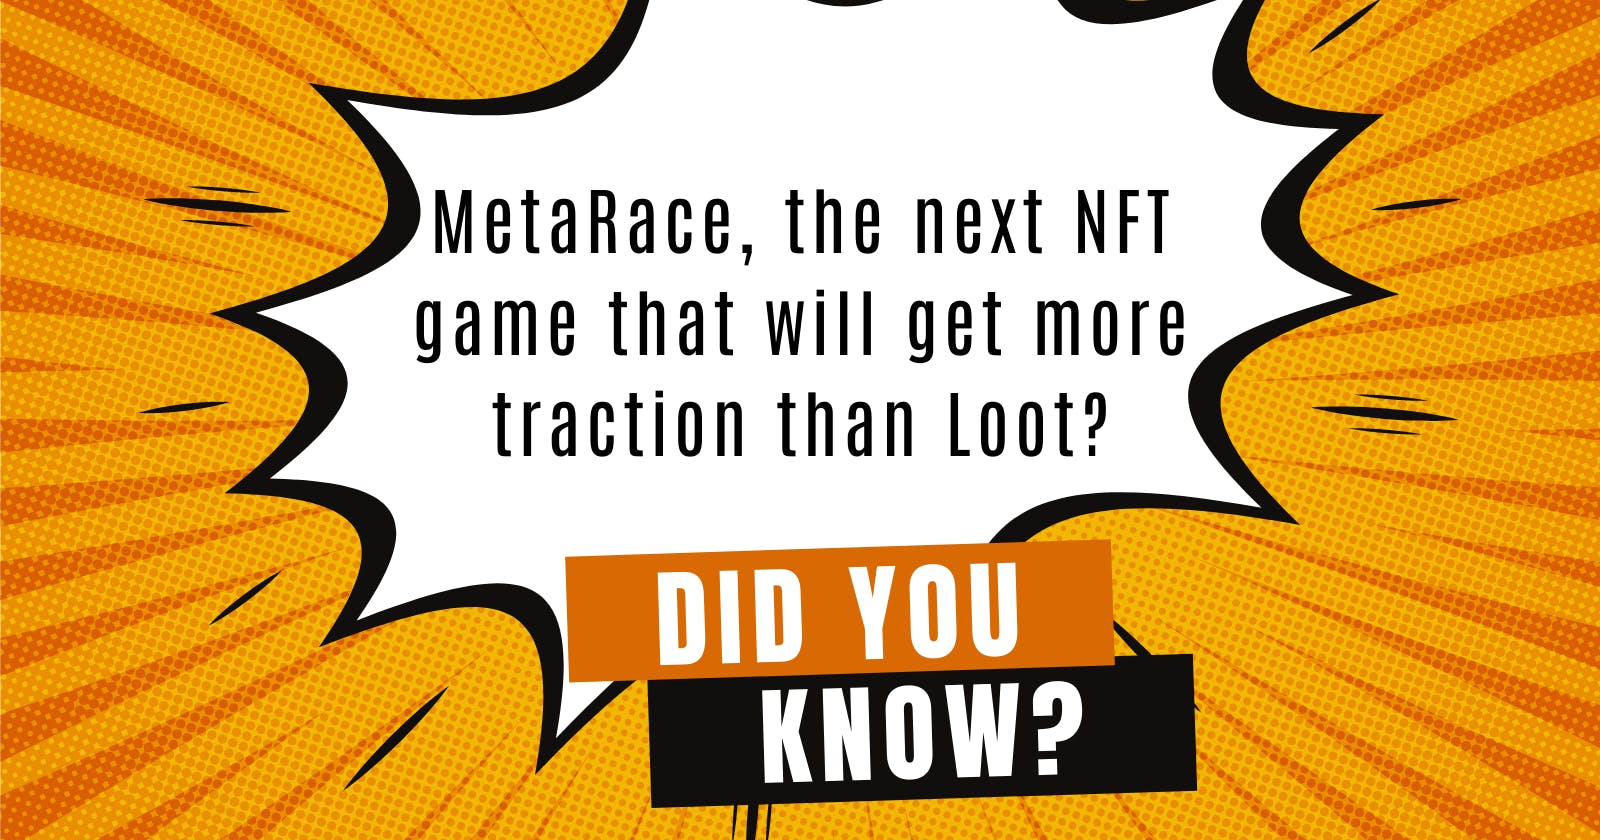 MetaRace, the next NFT game that will get more traction than Loot?